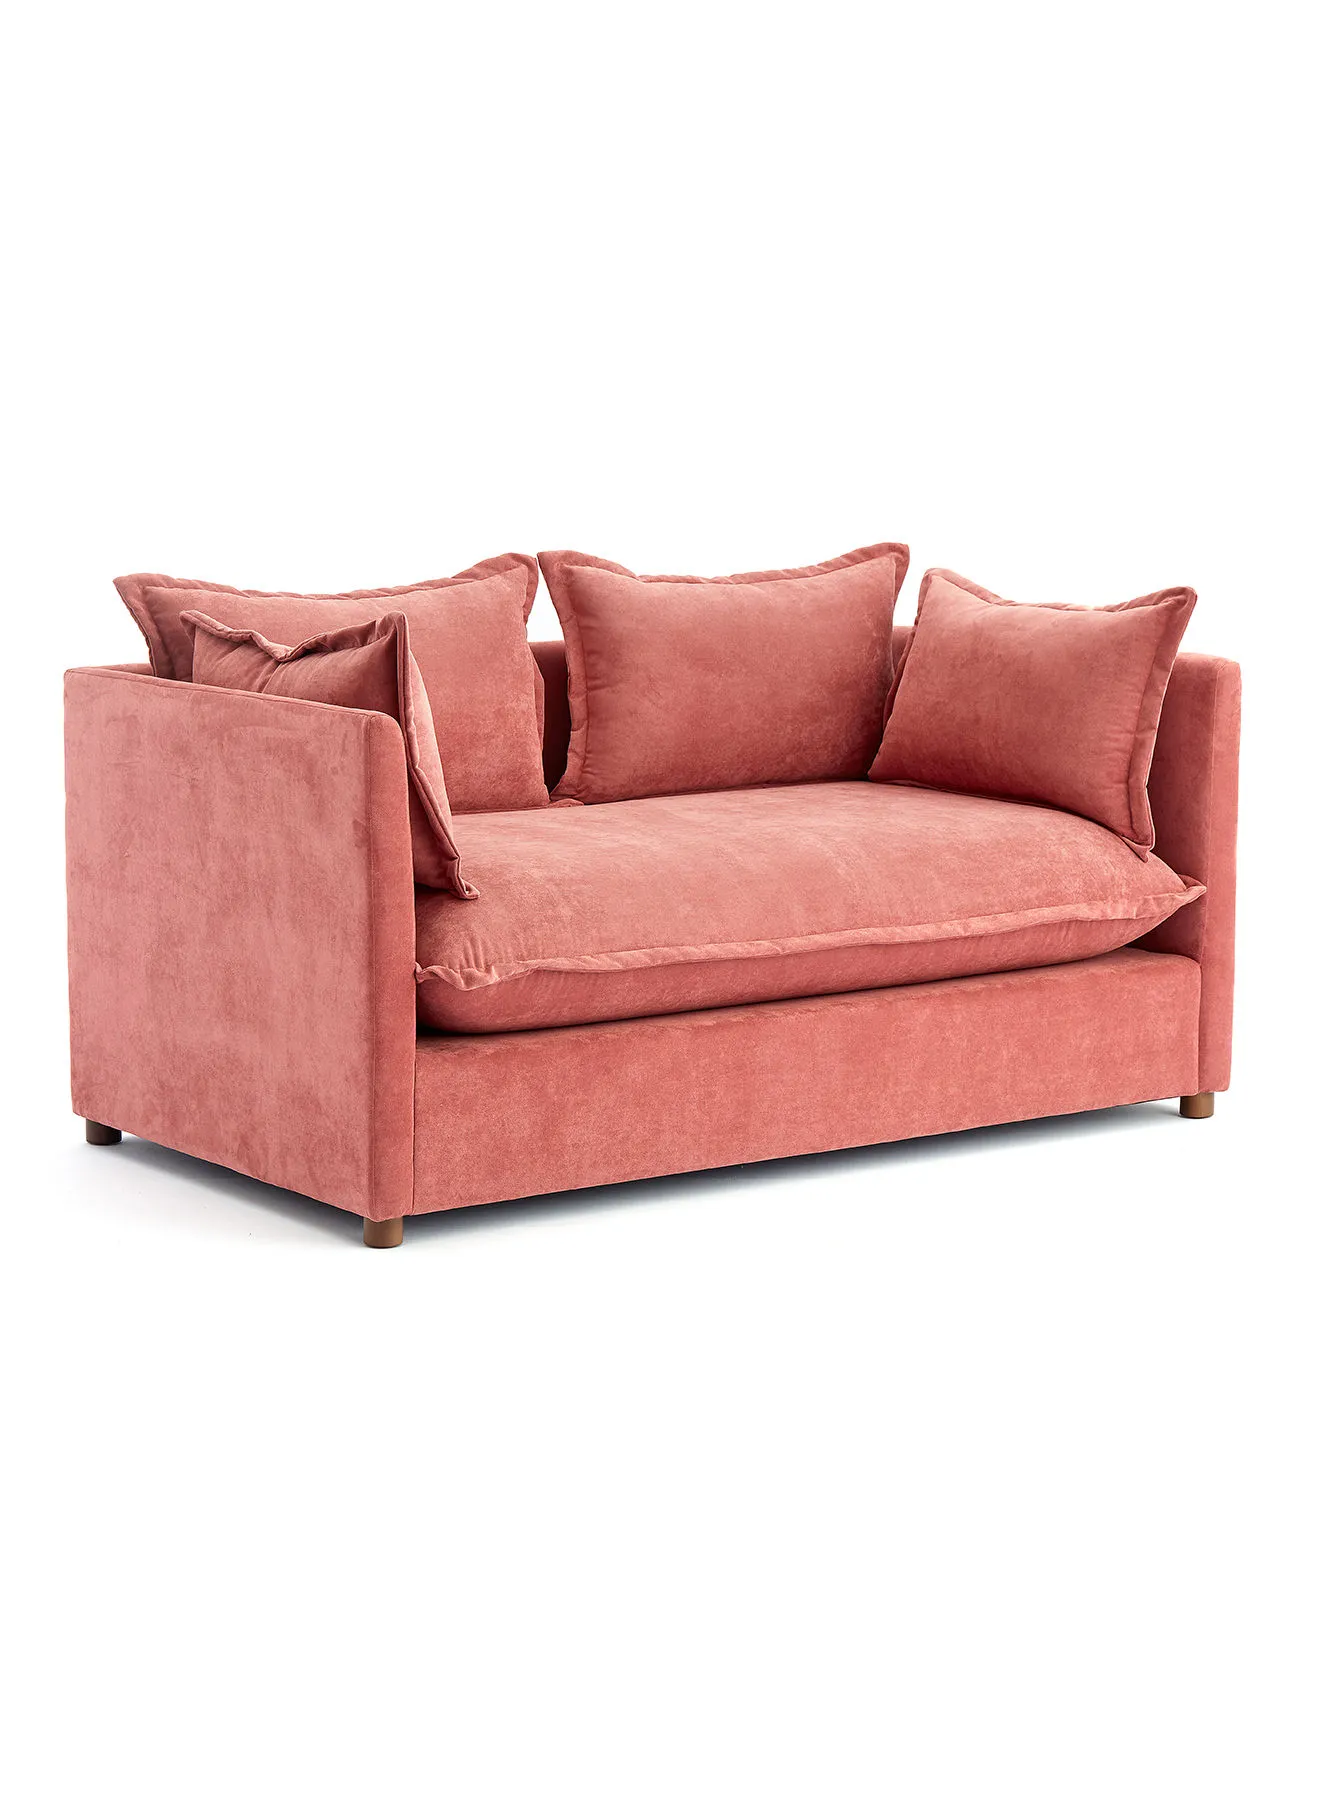 ebb & flow Sofa Luxurious - Red Wood Couch - 1770 X 990 X 693 - 2 Seater Sofa Relaxing Sofa